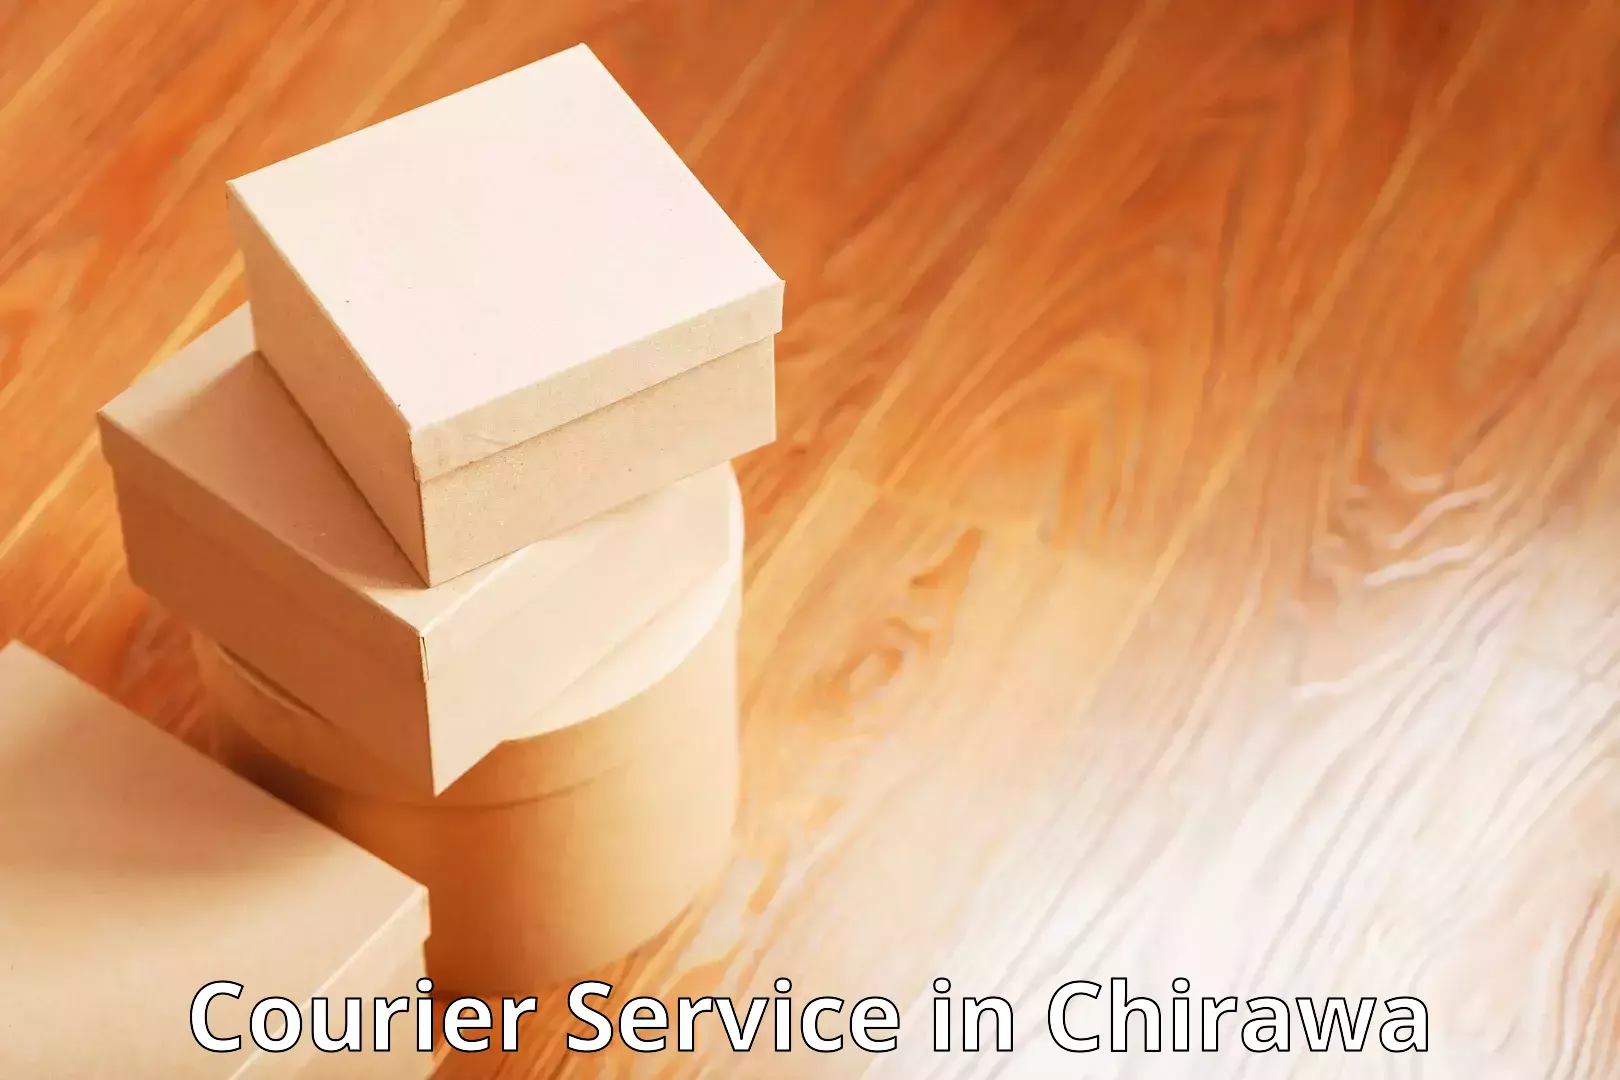 Cash on delivery service in Chirawa